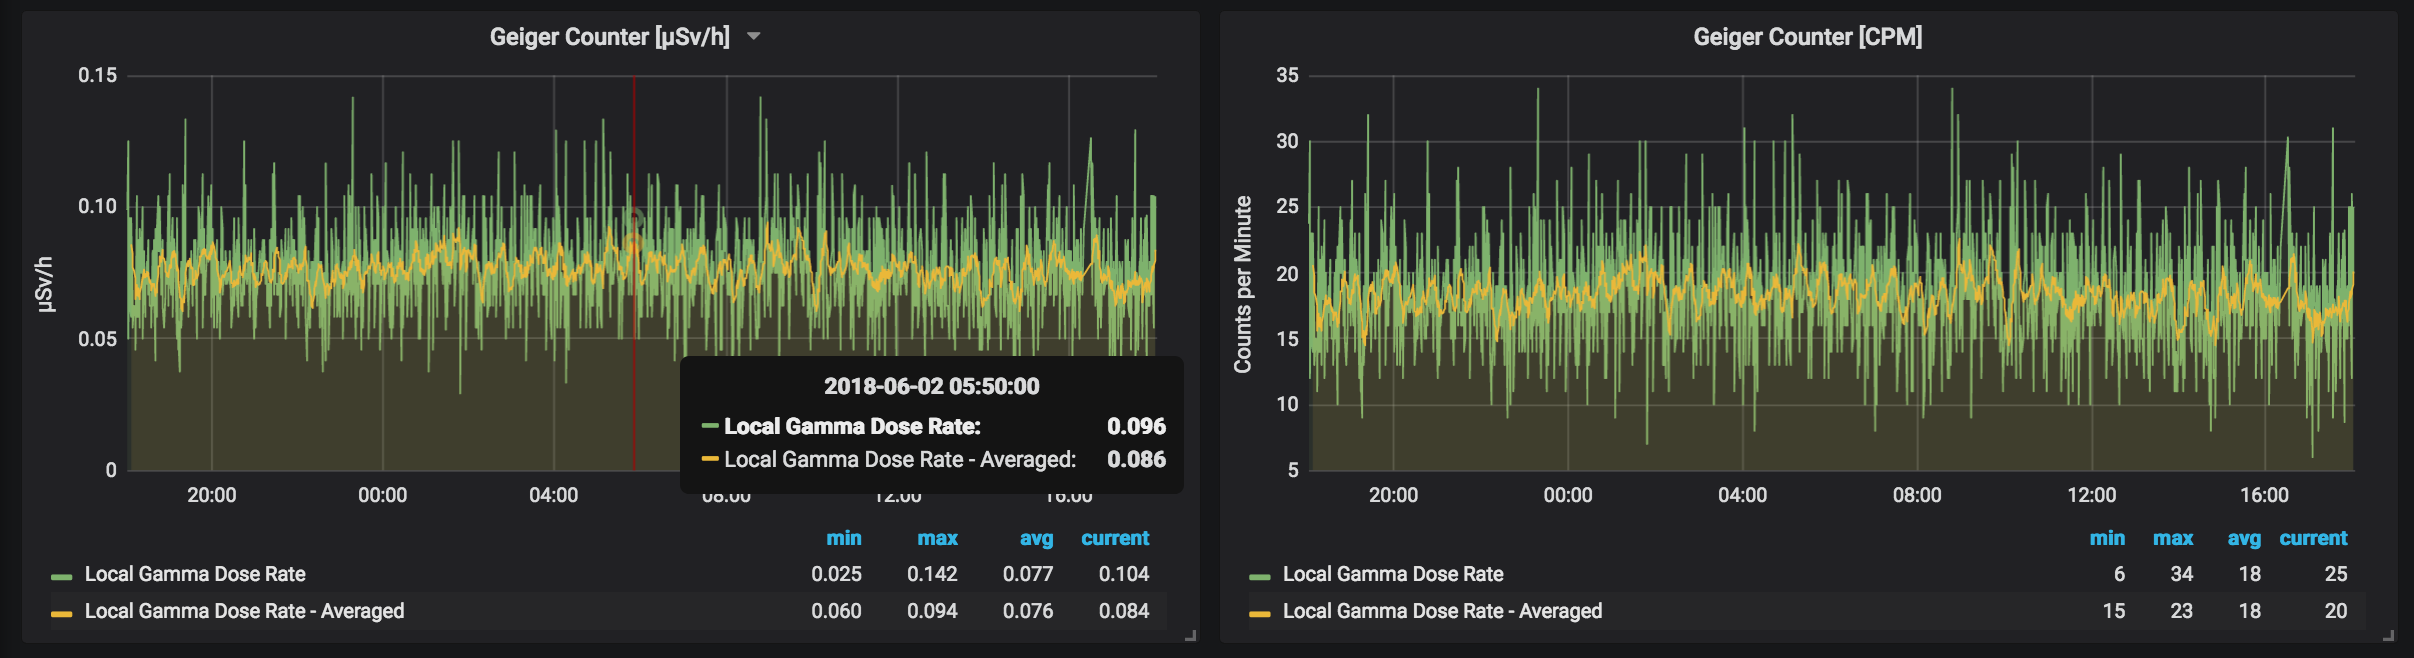 Grafana dashboard for the Geiger Counter